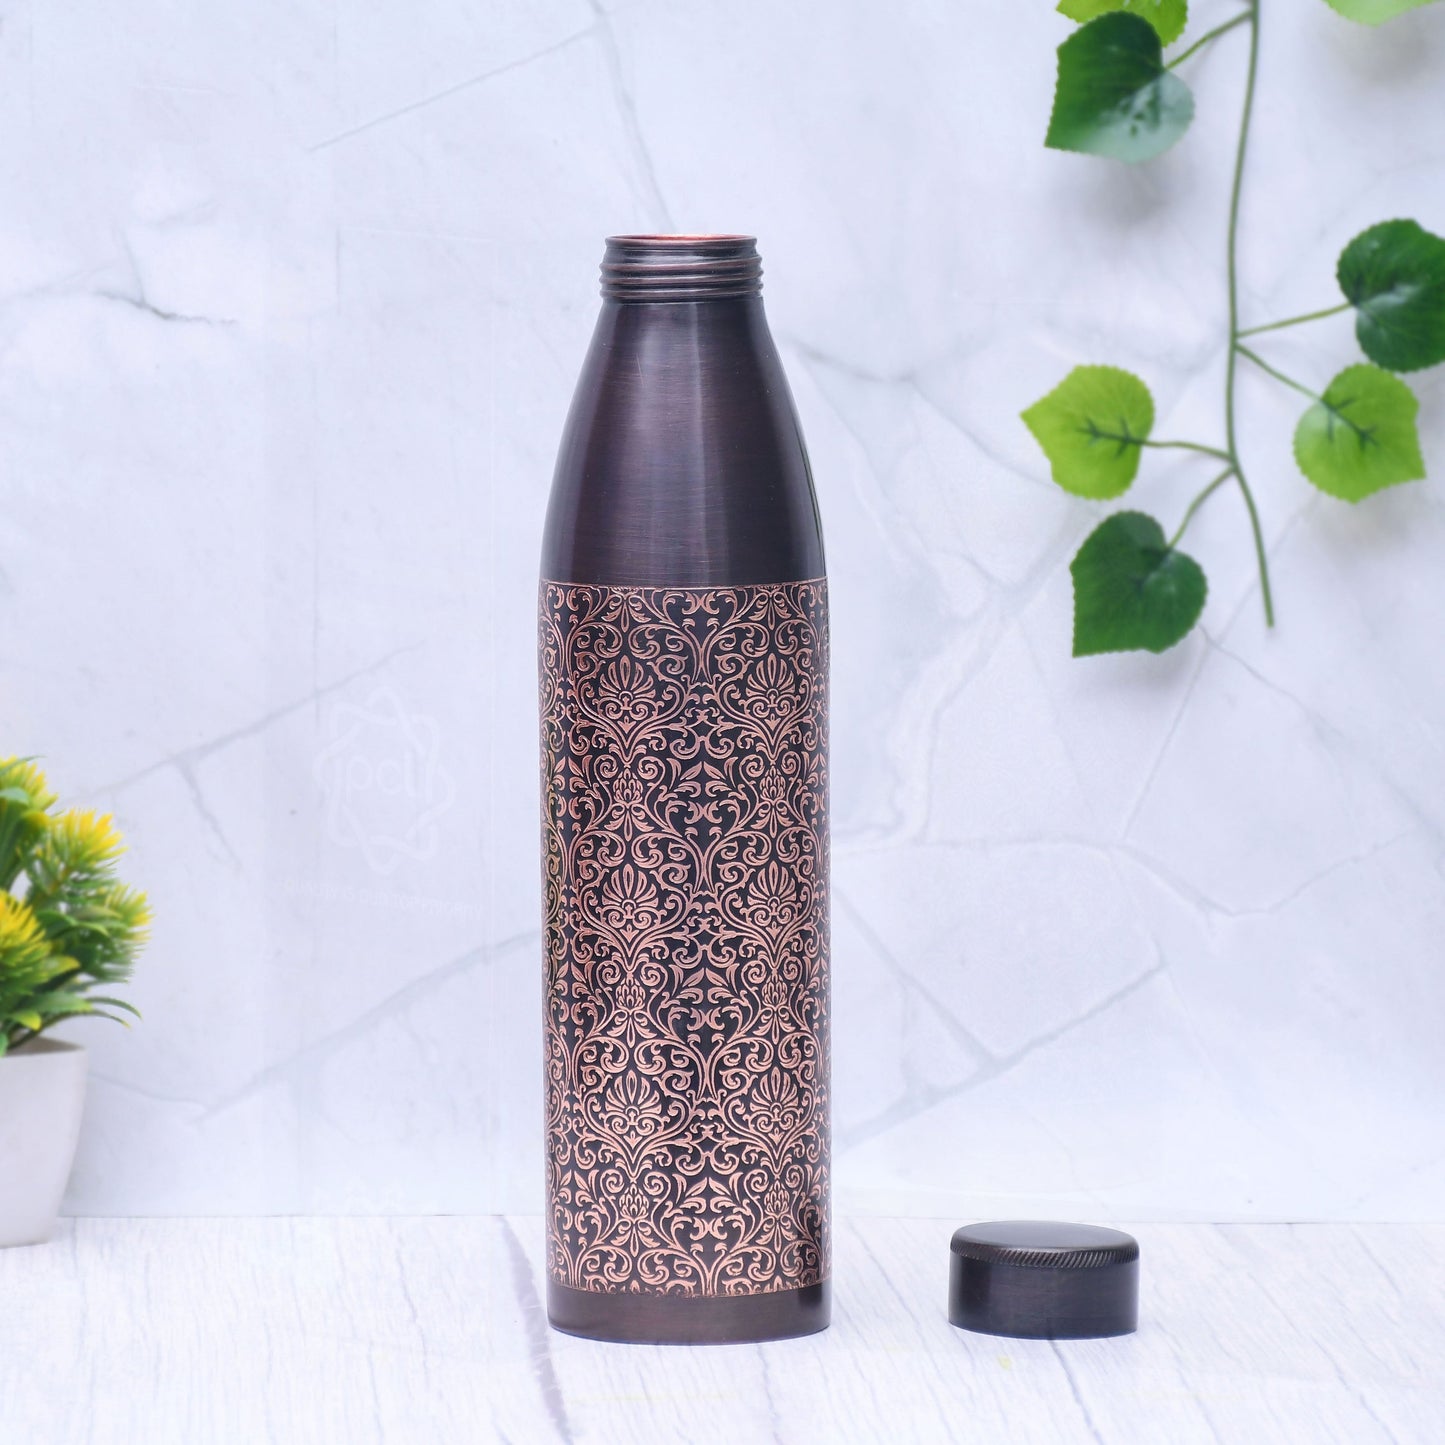 SAMA Homes - pure copper water bottle dr engraved